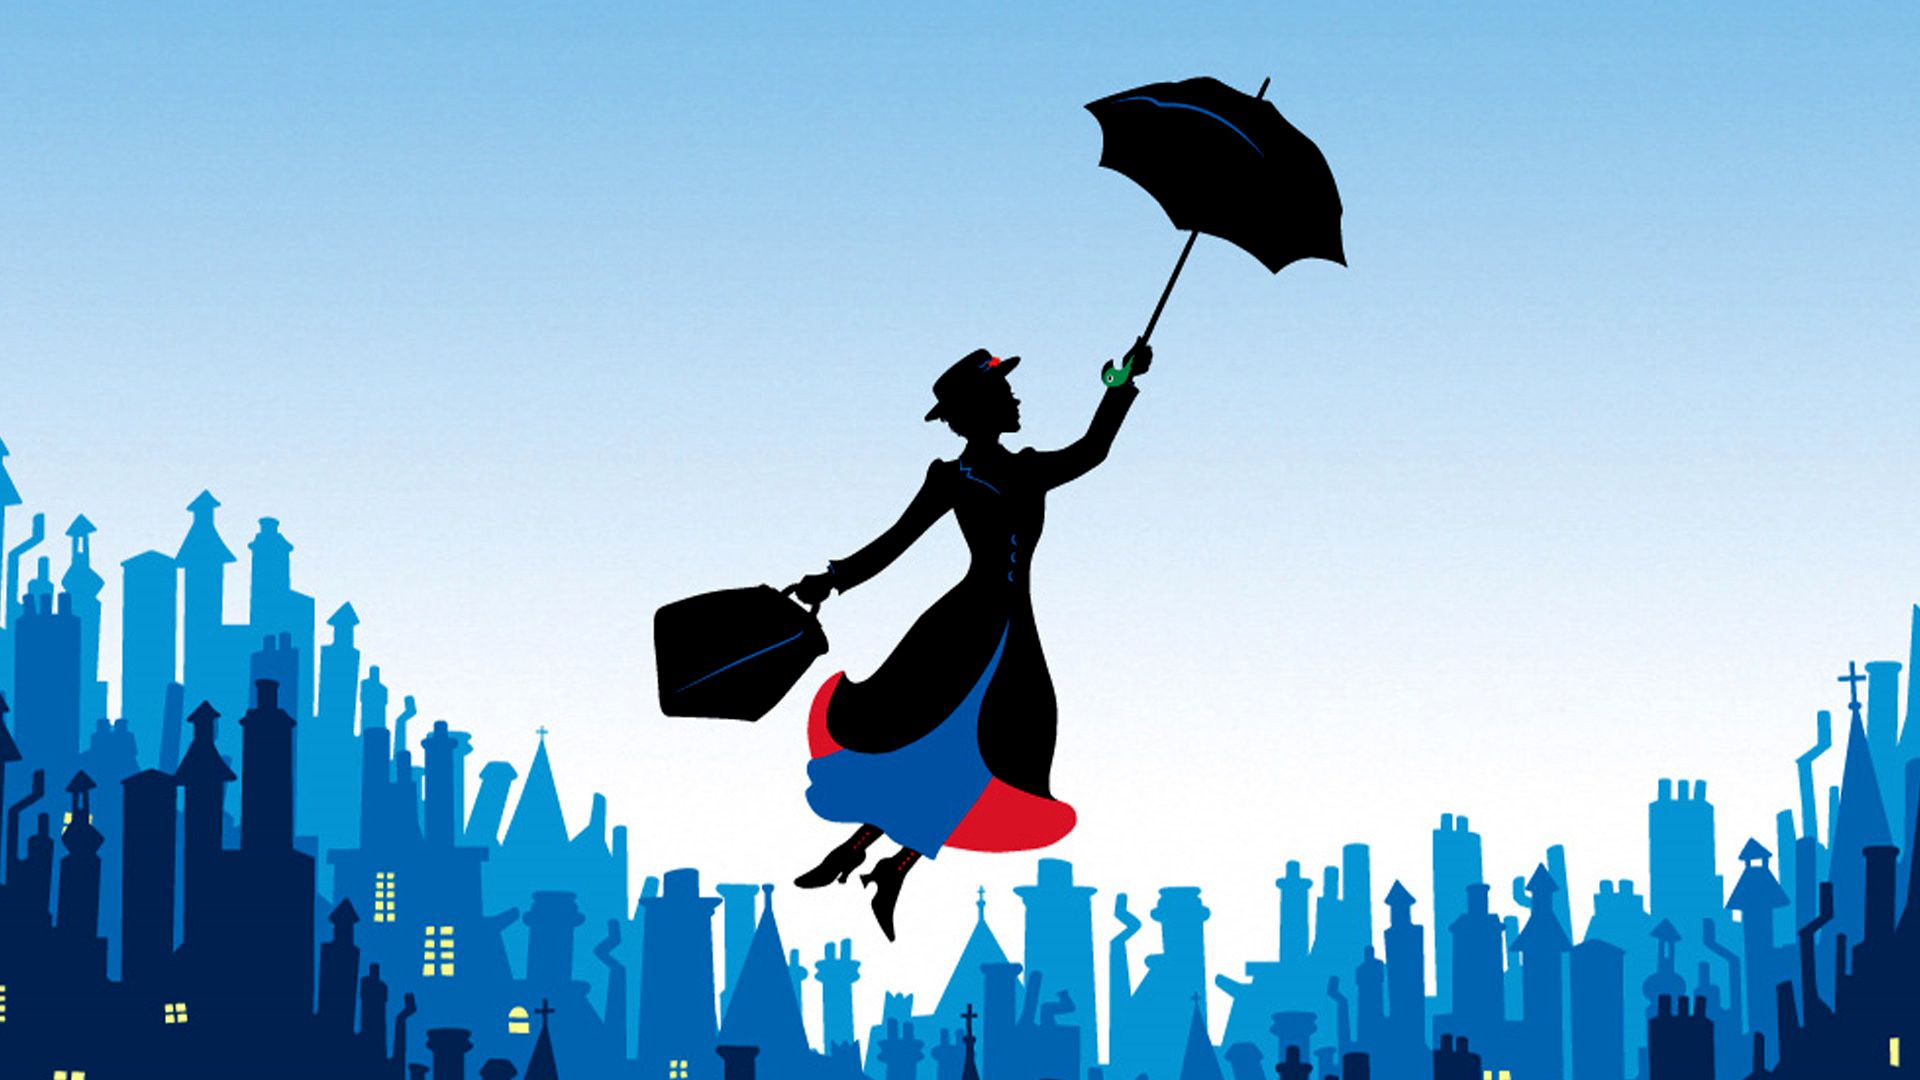 Mary Poppins background